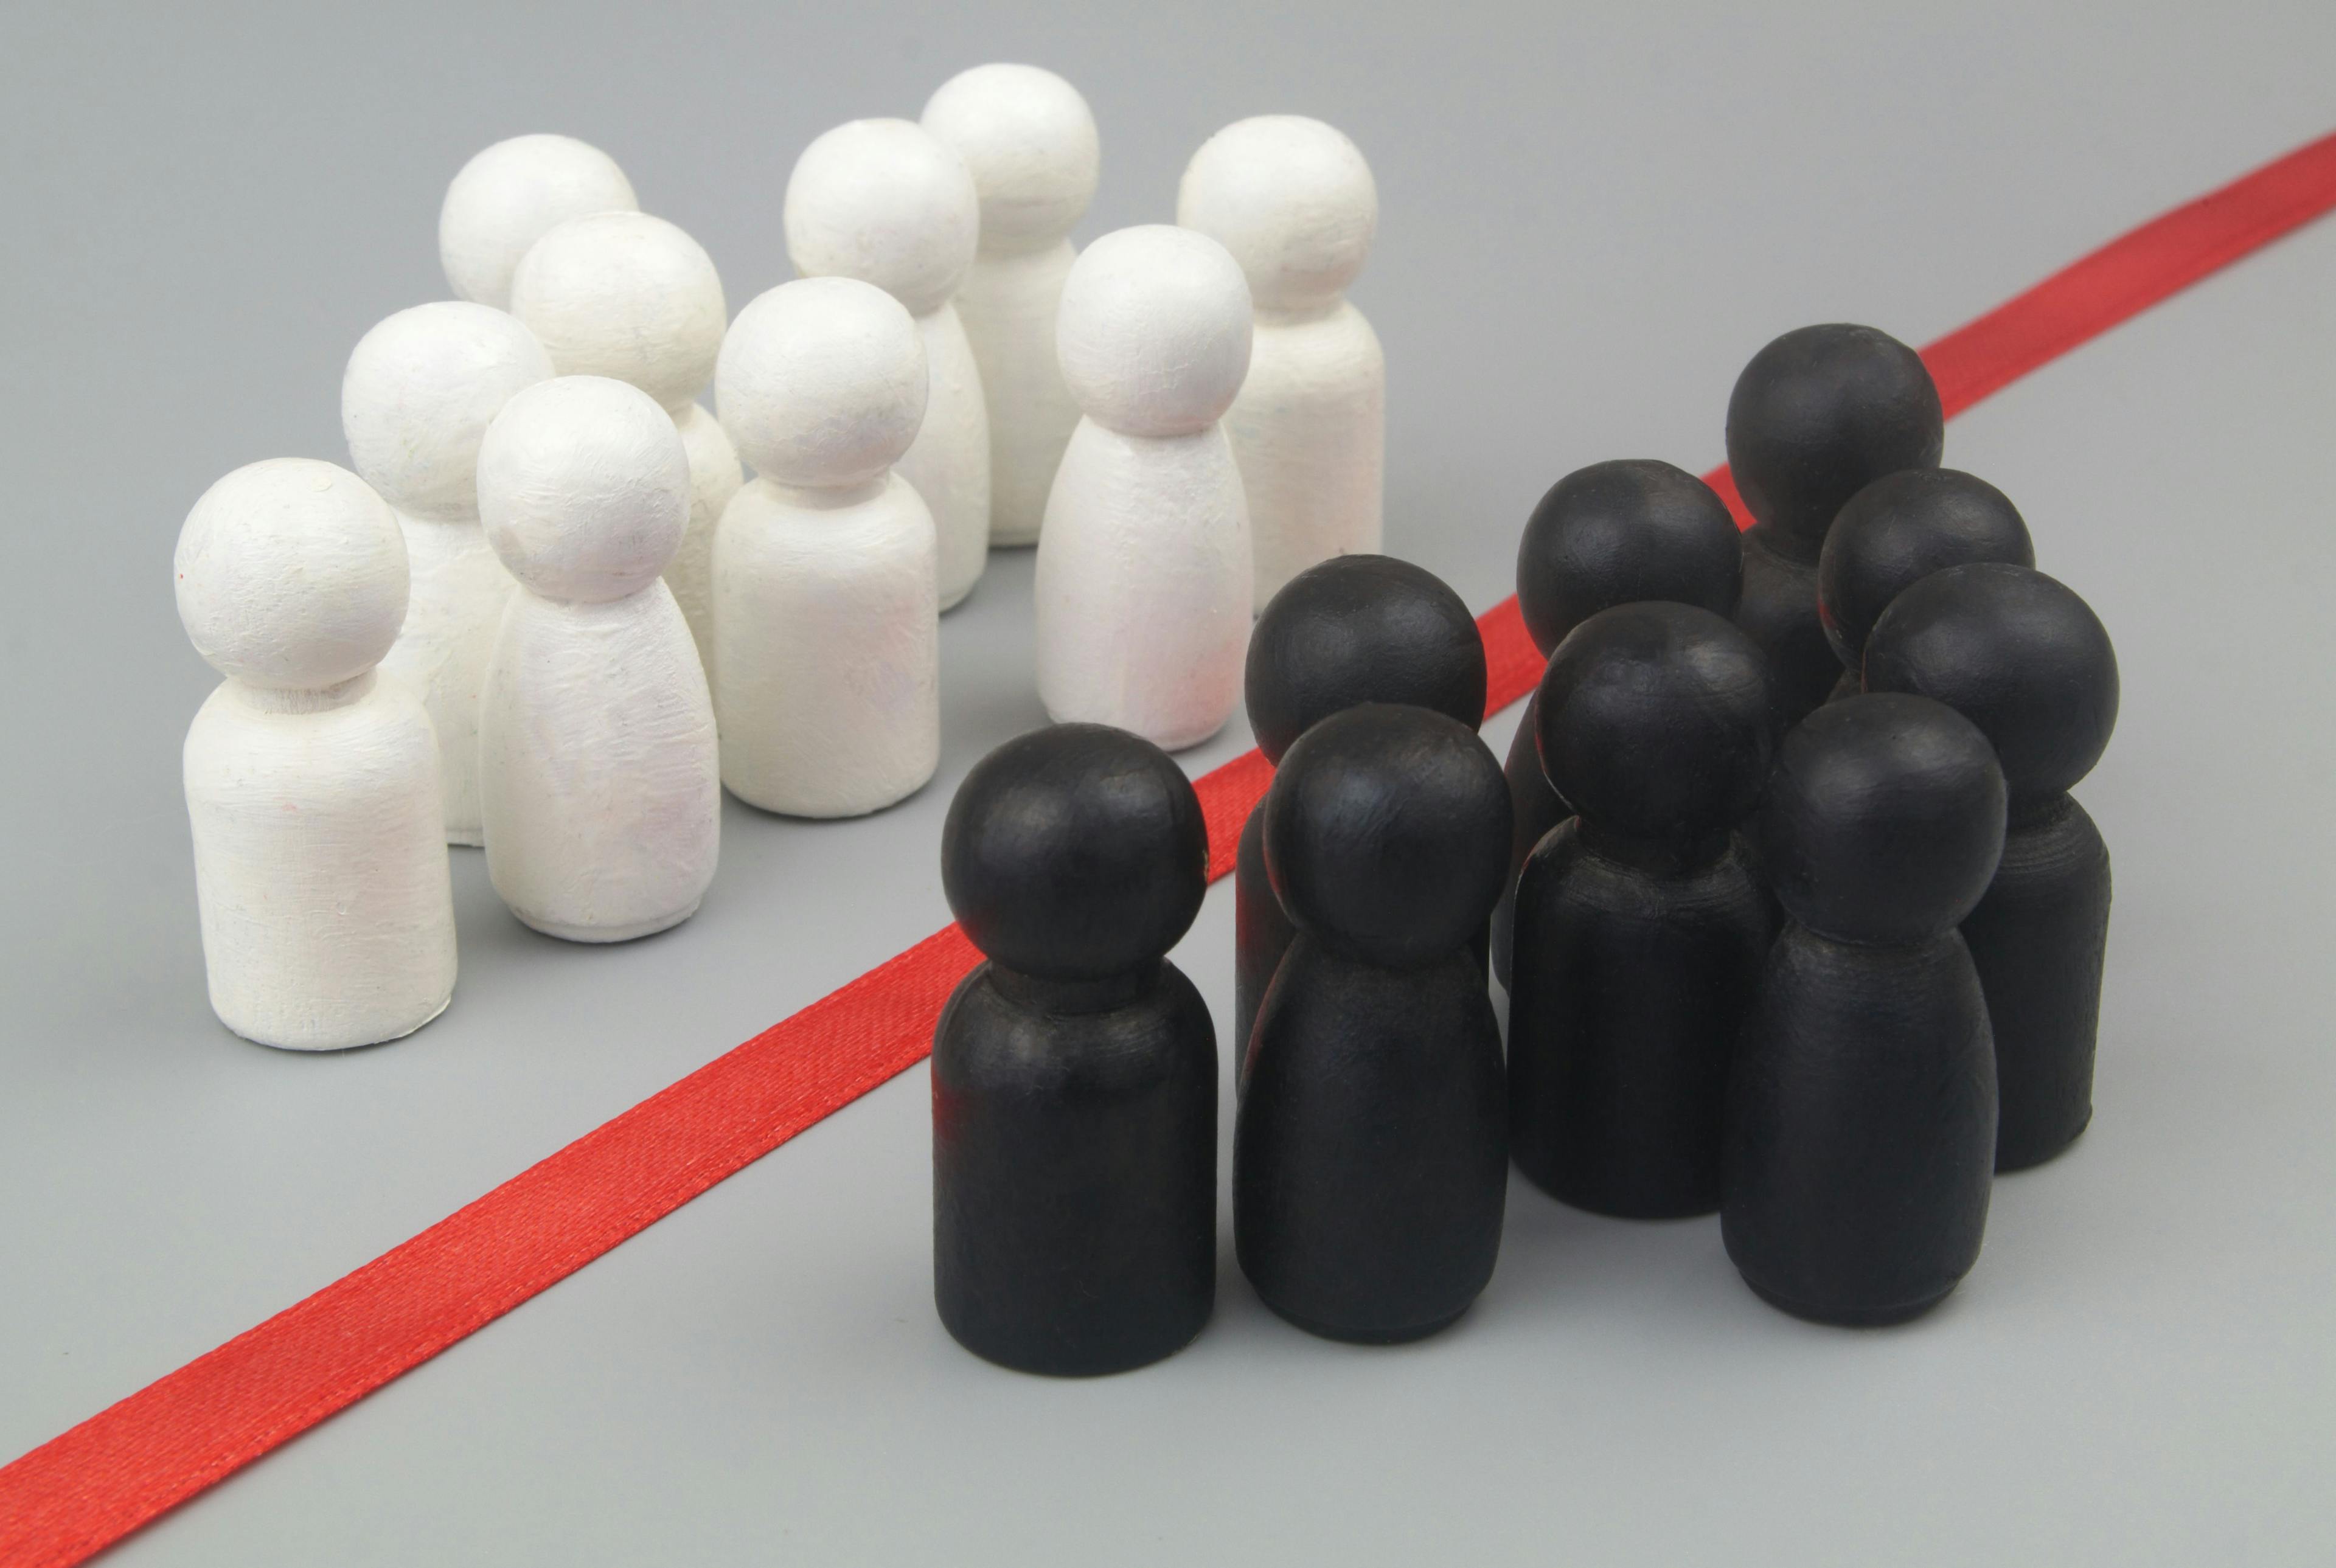 Groups of white and black people figures separated by red line on gray background.